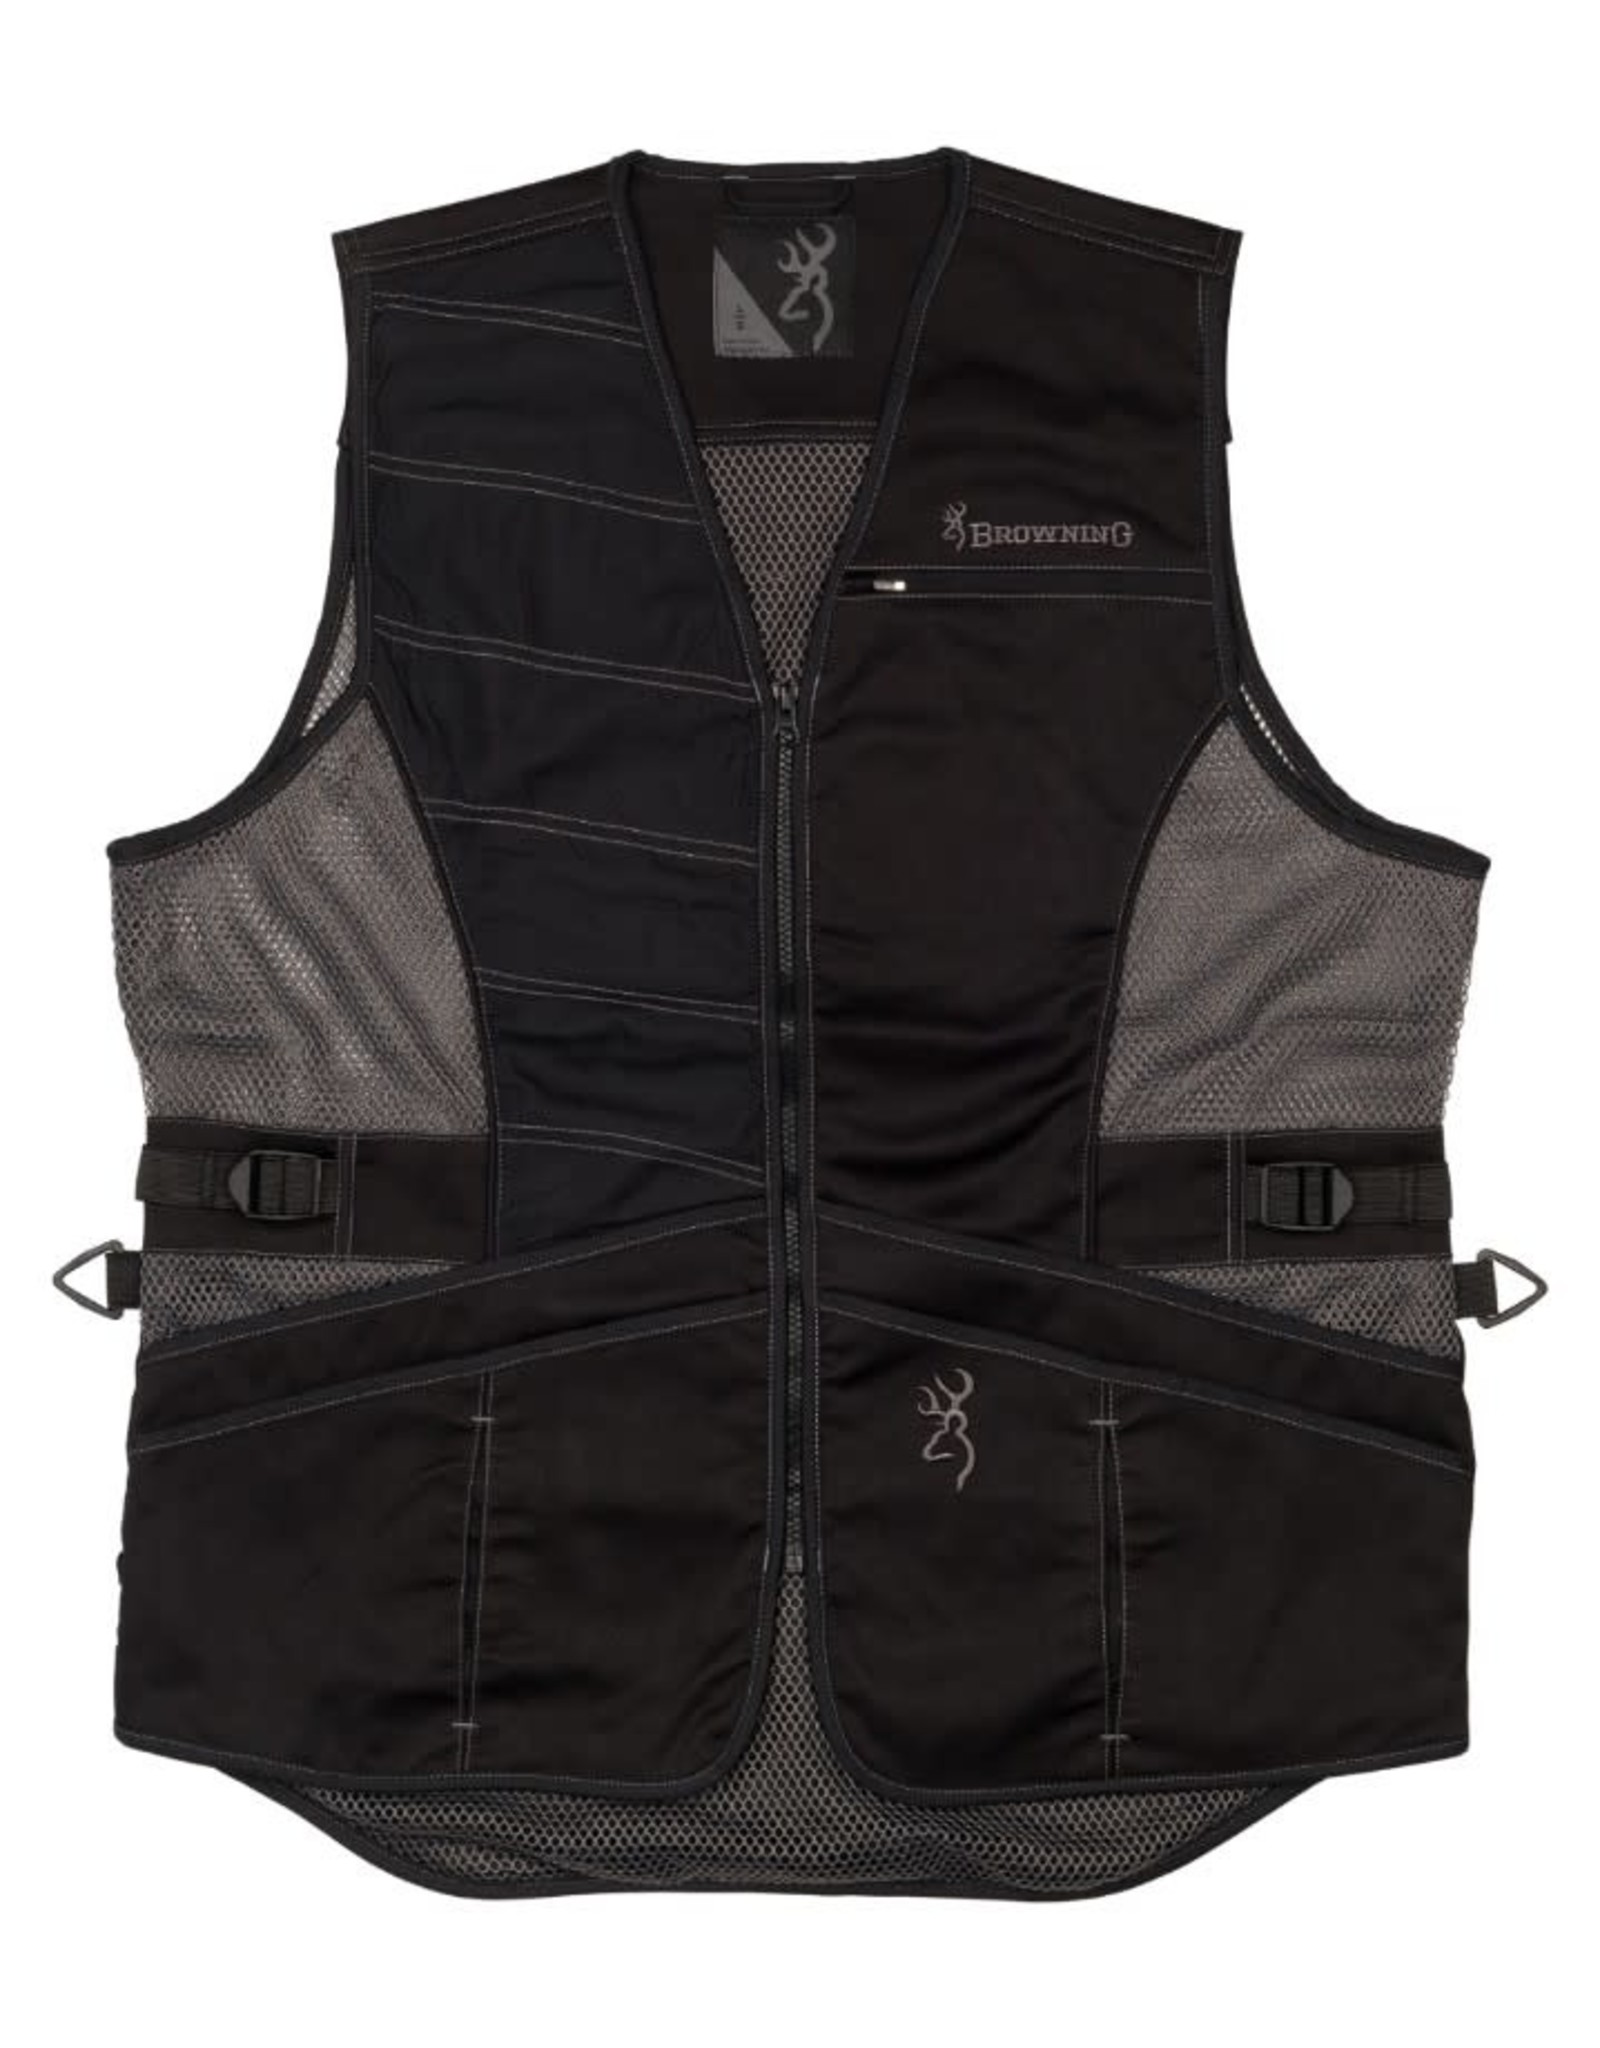 Browning Ace Shooting Vest - Black - 2XL